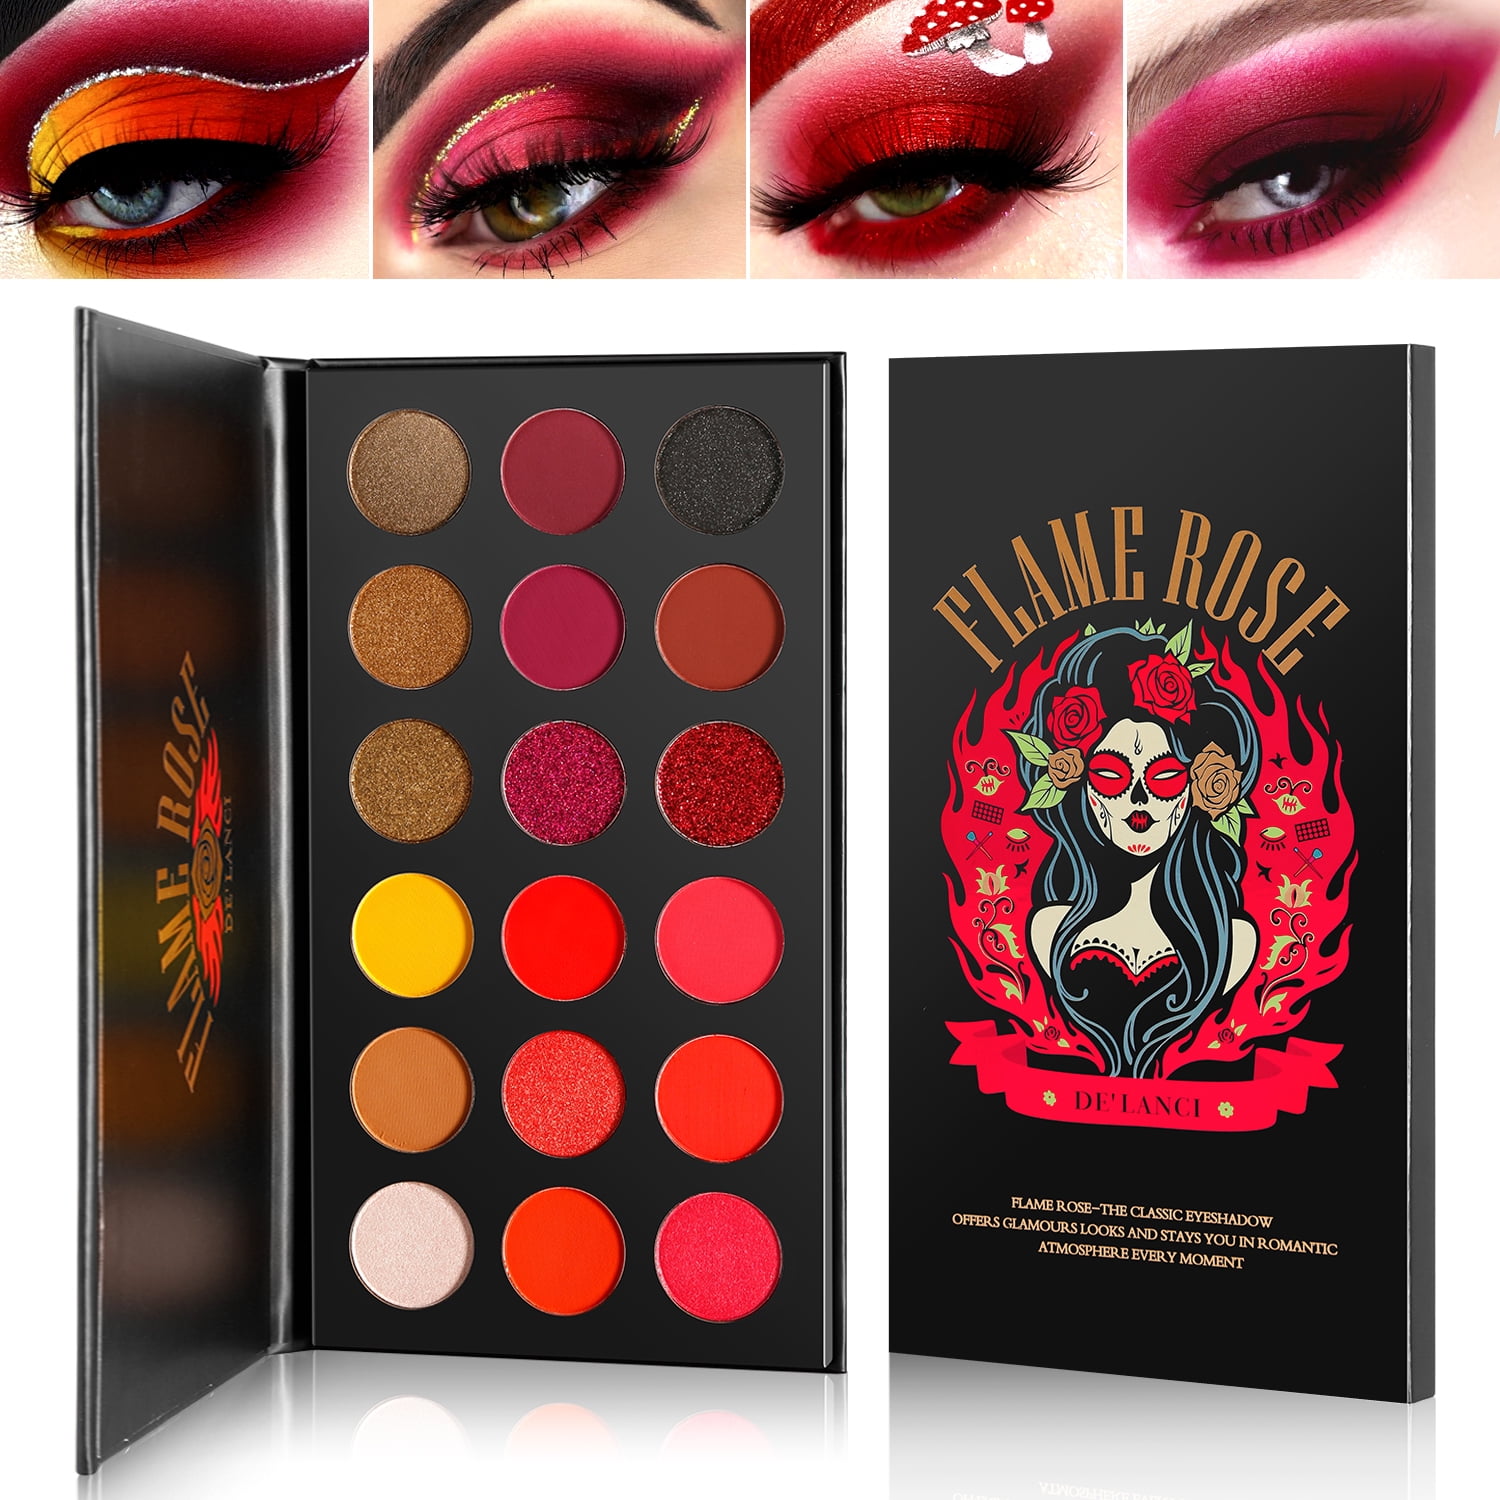 Red Eyeshadow Palette Highly Pigmented,Long Lasting True Red Eye Shadow Makeup Pallet 18 Color, Matte Shimmer Gold Black Yellow Sunset Warm Blendable Eye Shades Pallete - Walmart.com